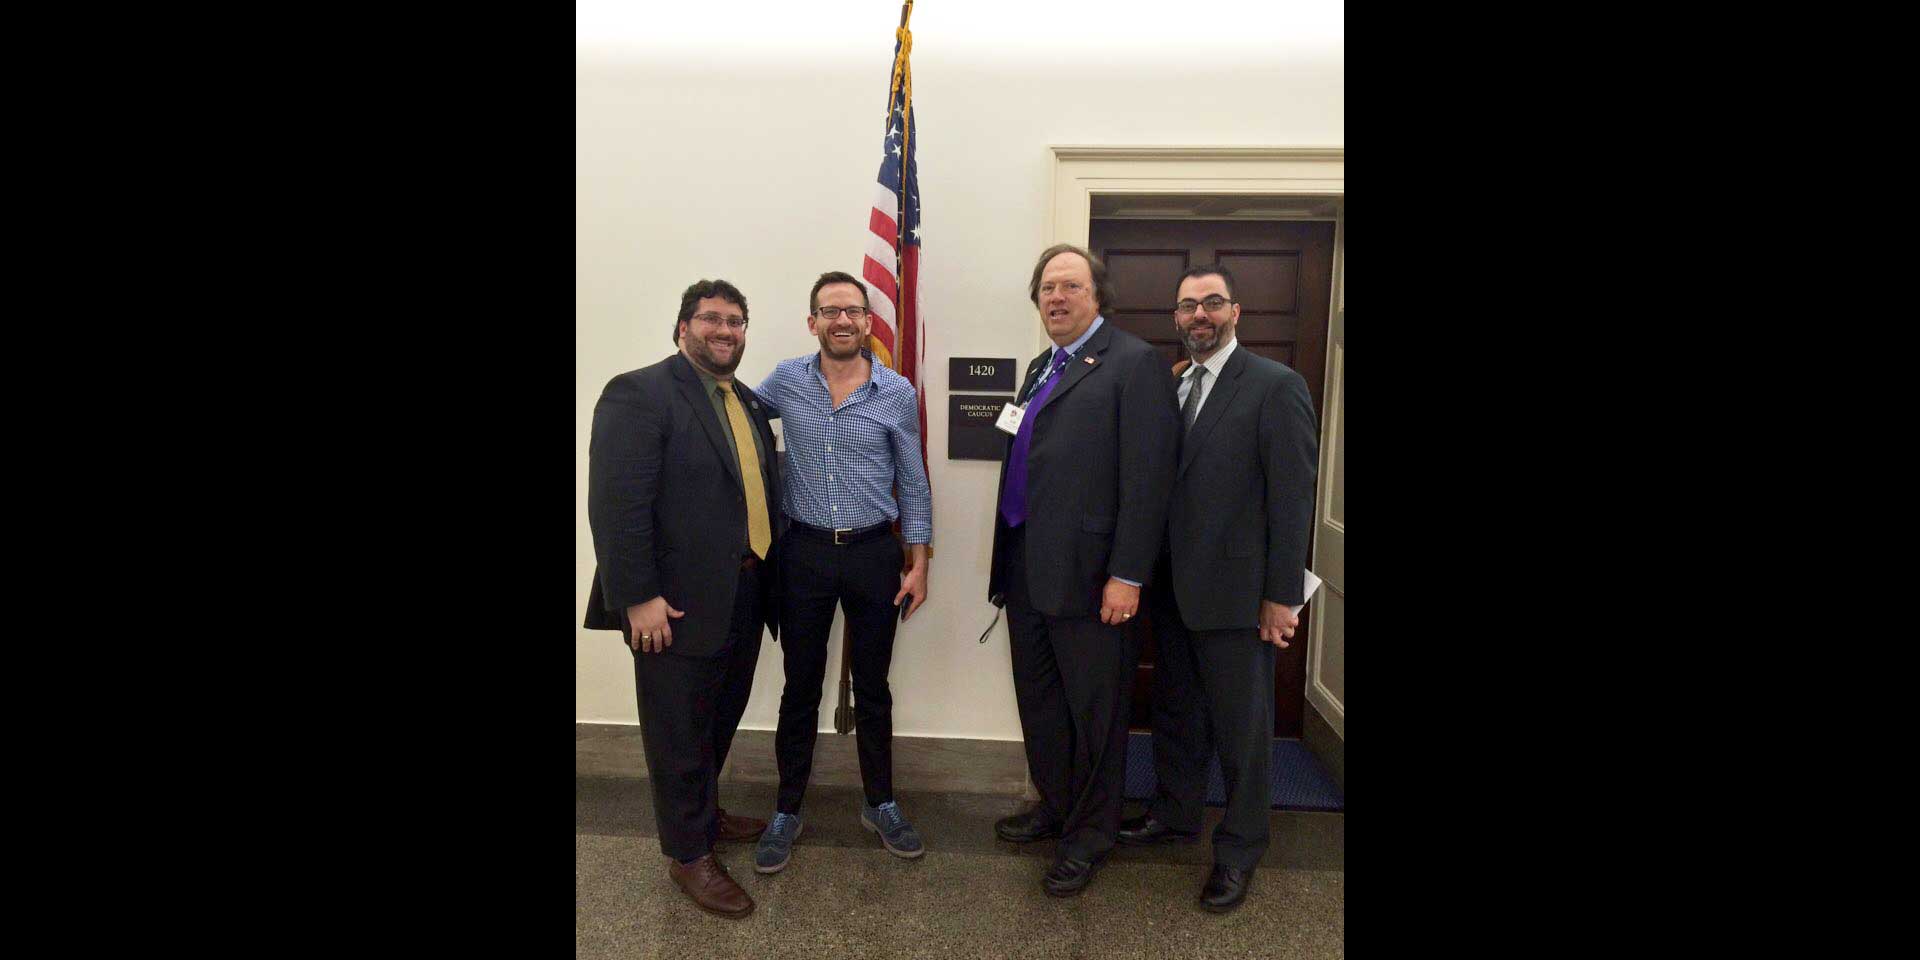 L-R: PIANY-YIP President Jason E. Bartow ; Policy Director to Rep. Joseph Crowley, D-14, Kevin Casey; PIANY past President Jeffrey H. Greenfield; and PIANY Director Anthony Kammas.